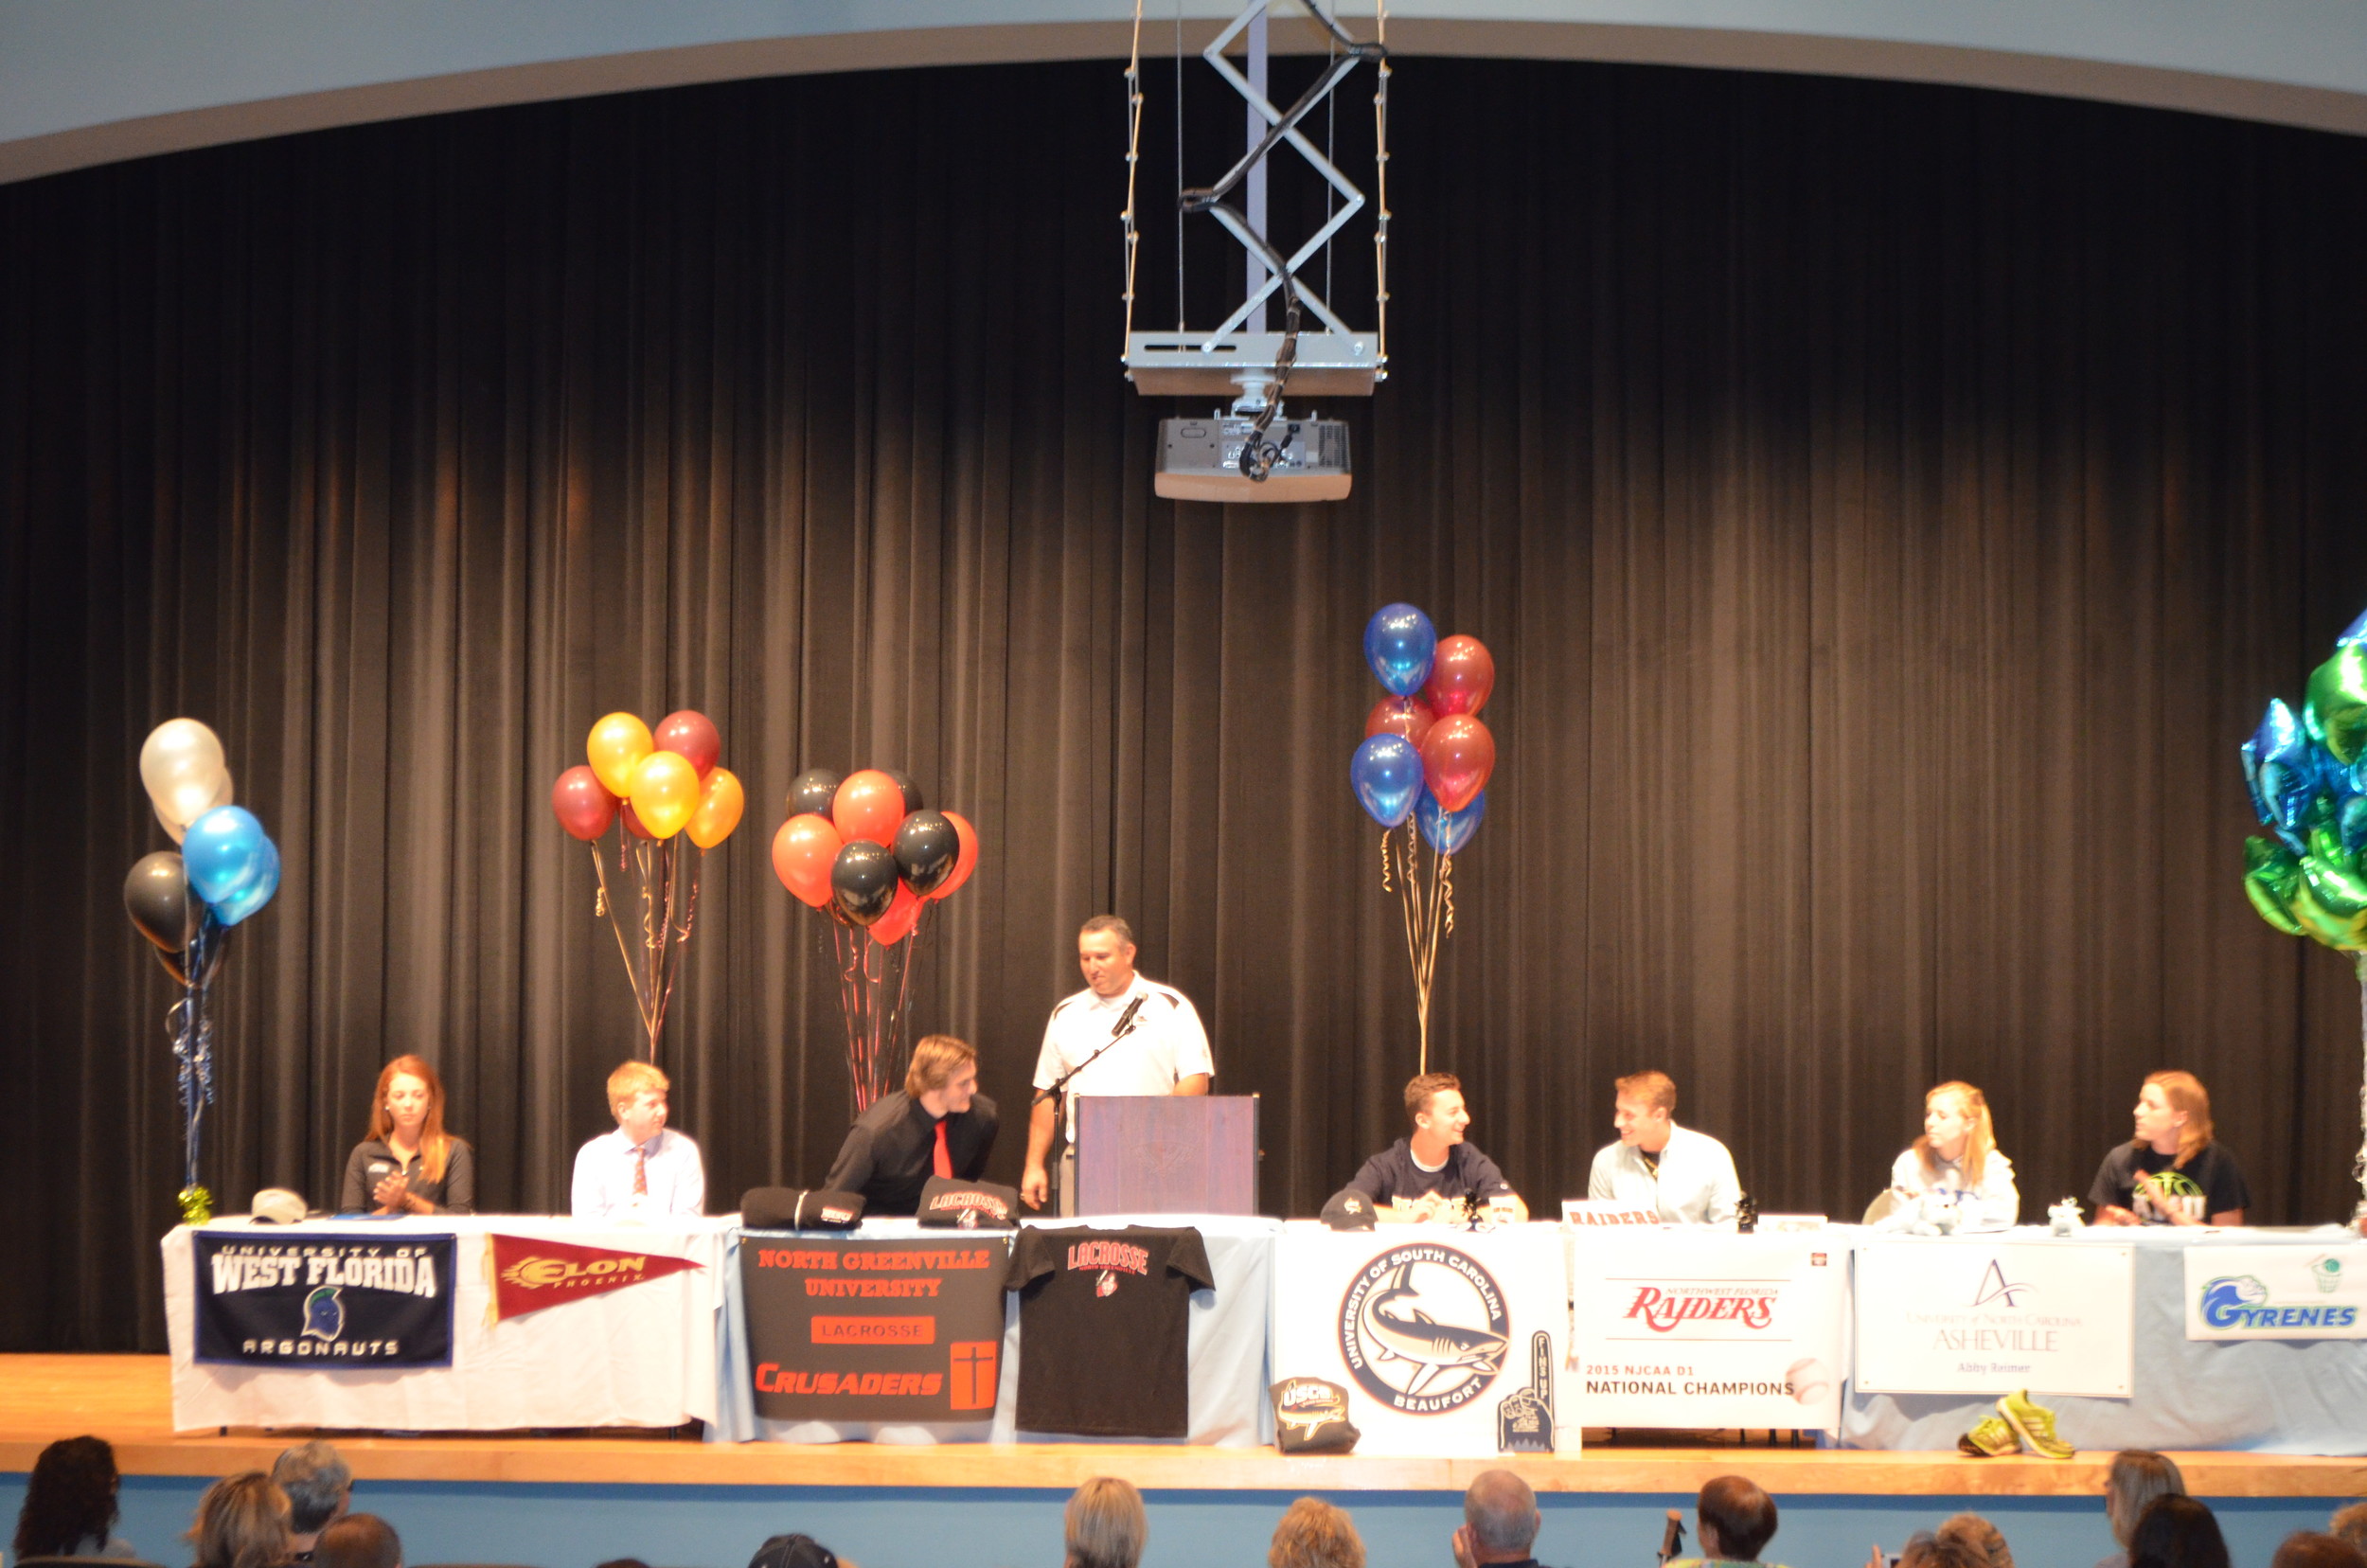 Pictured from left to right are Hannah Berman (golf, University of West Florida), Logan Membrino (golf, Elon College), Greg Celani (lacrosse, North Greenville College), JD Norris (baseball, University of South Carolina Beaufort), Jack Layrisson (baseball, NW Florida State College), Abby Reimer (cross country, UNC-Ashville) and Erin Landis (basketball, Ava Maria University).